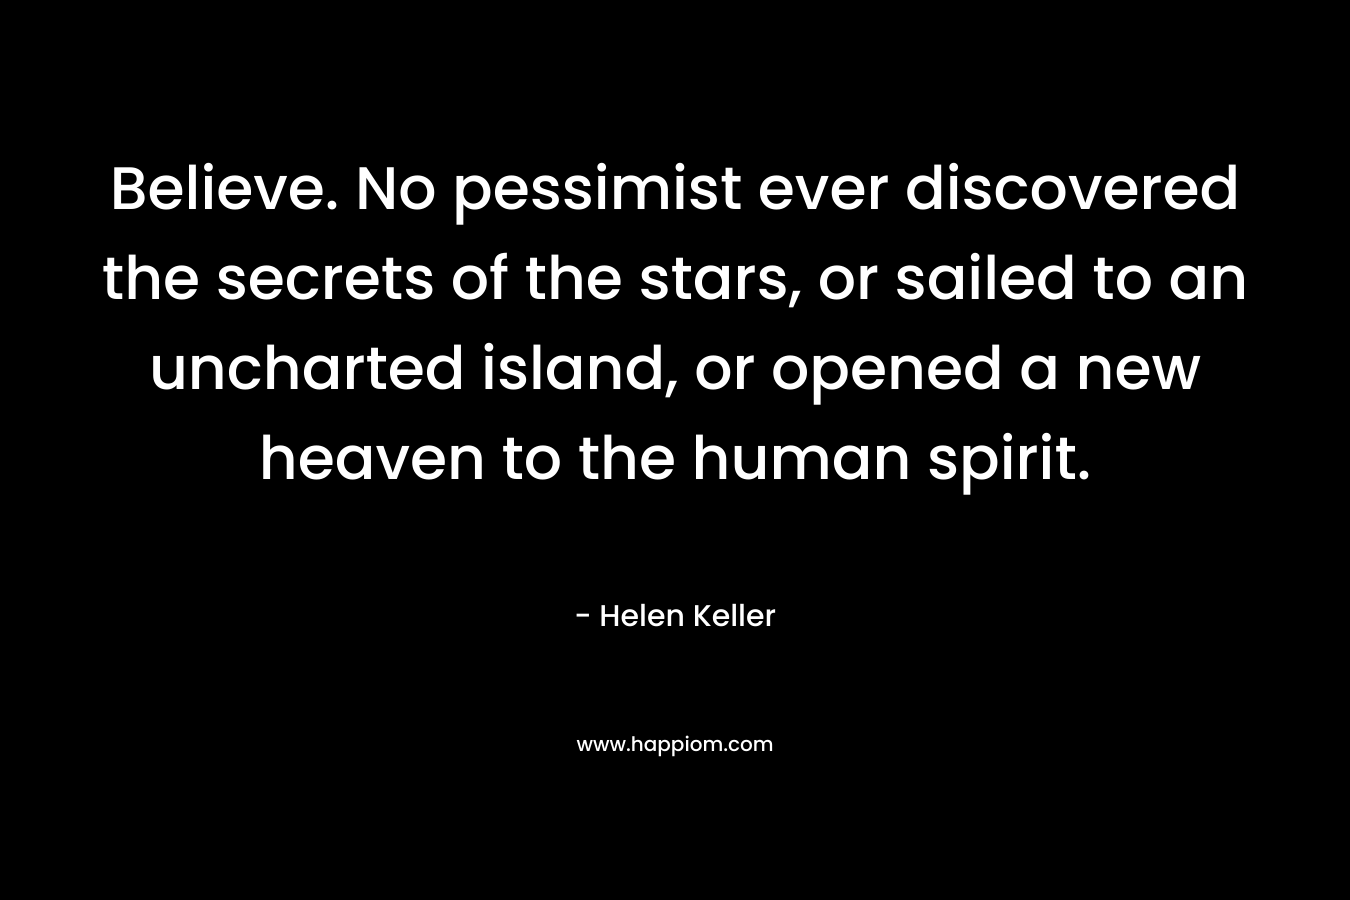 Believe. No pessimist ever discovered the secrets of the stars, or sailed to an uncharted island, or opened a new heaven to the human spirit.